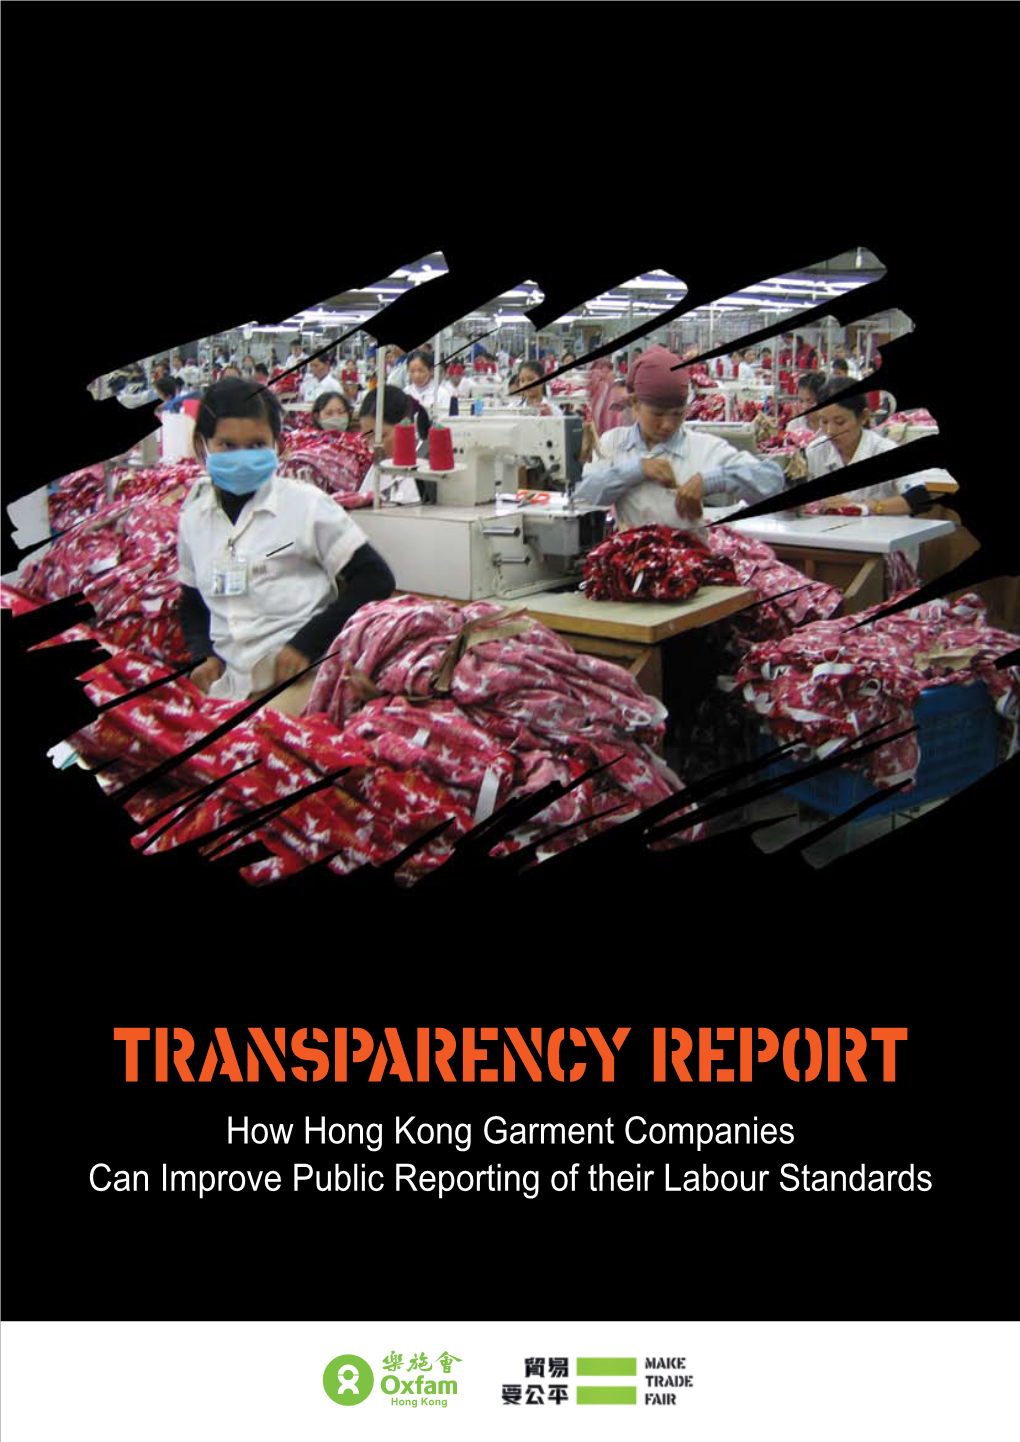 TRANSPARENCY REPORT How Hong Kong Garment Companies Can Improve Public Reporting of Their Labour Standards © Oxfam Hong Kong November 2006